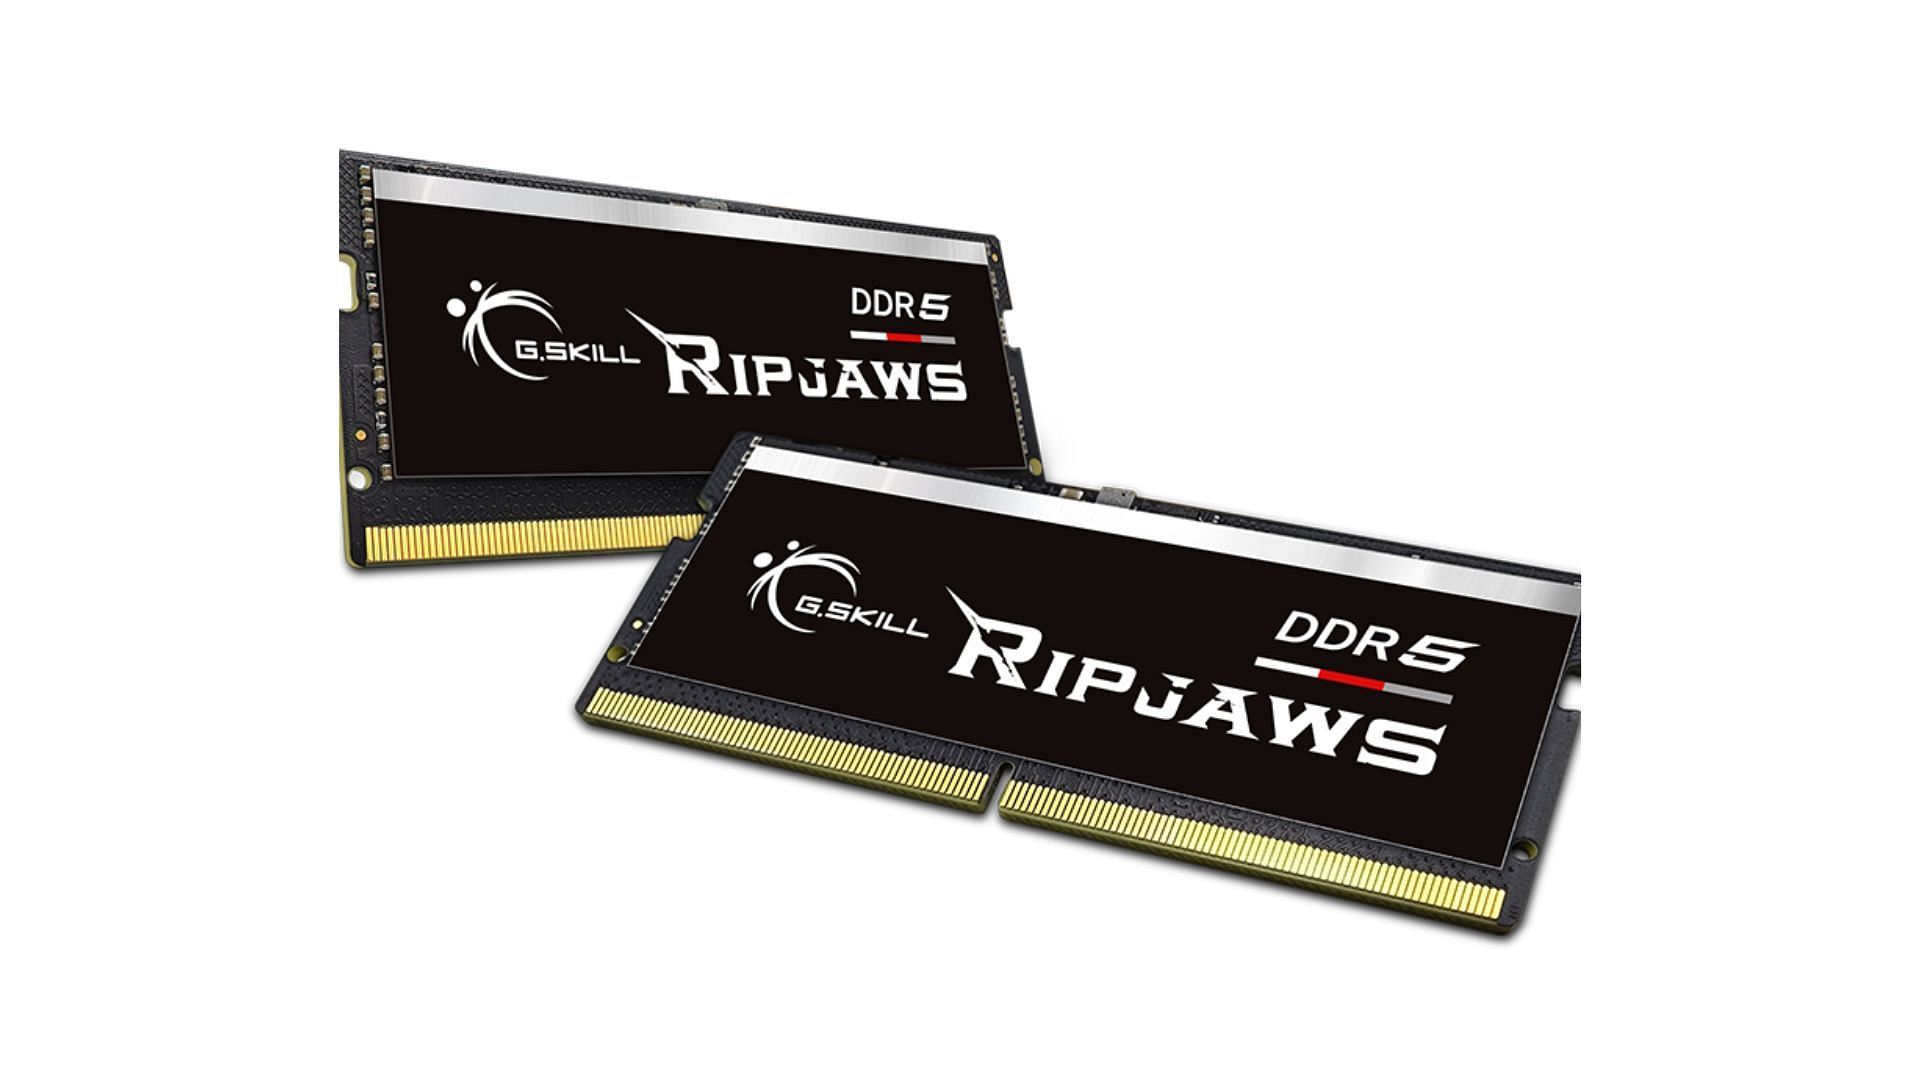 The G.SKILL Ripjaws DDR5-4800MT/s is one of the best DDR5 RAM for gaming laptops (Image via G.SKILL)